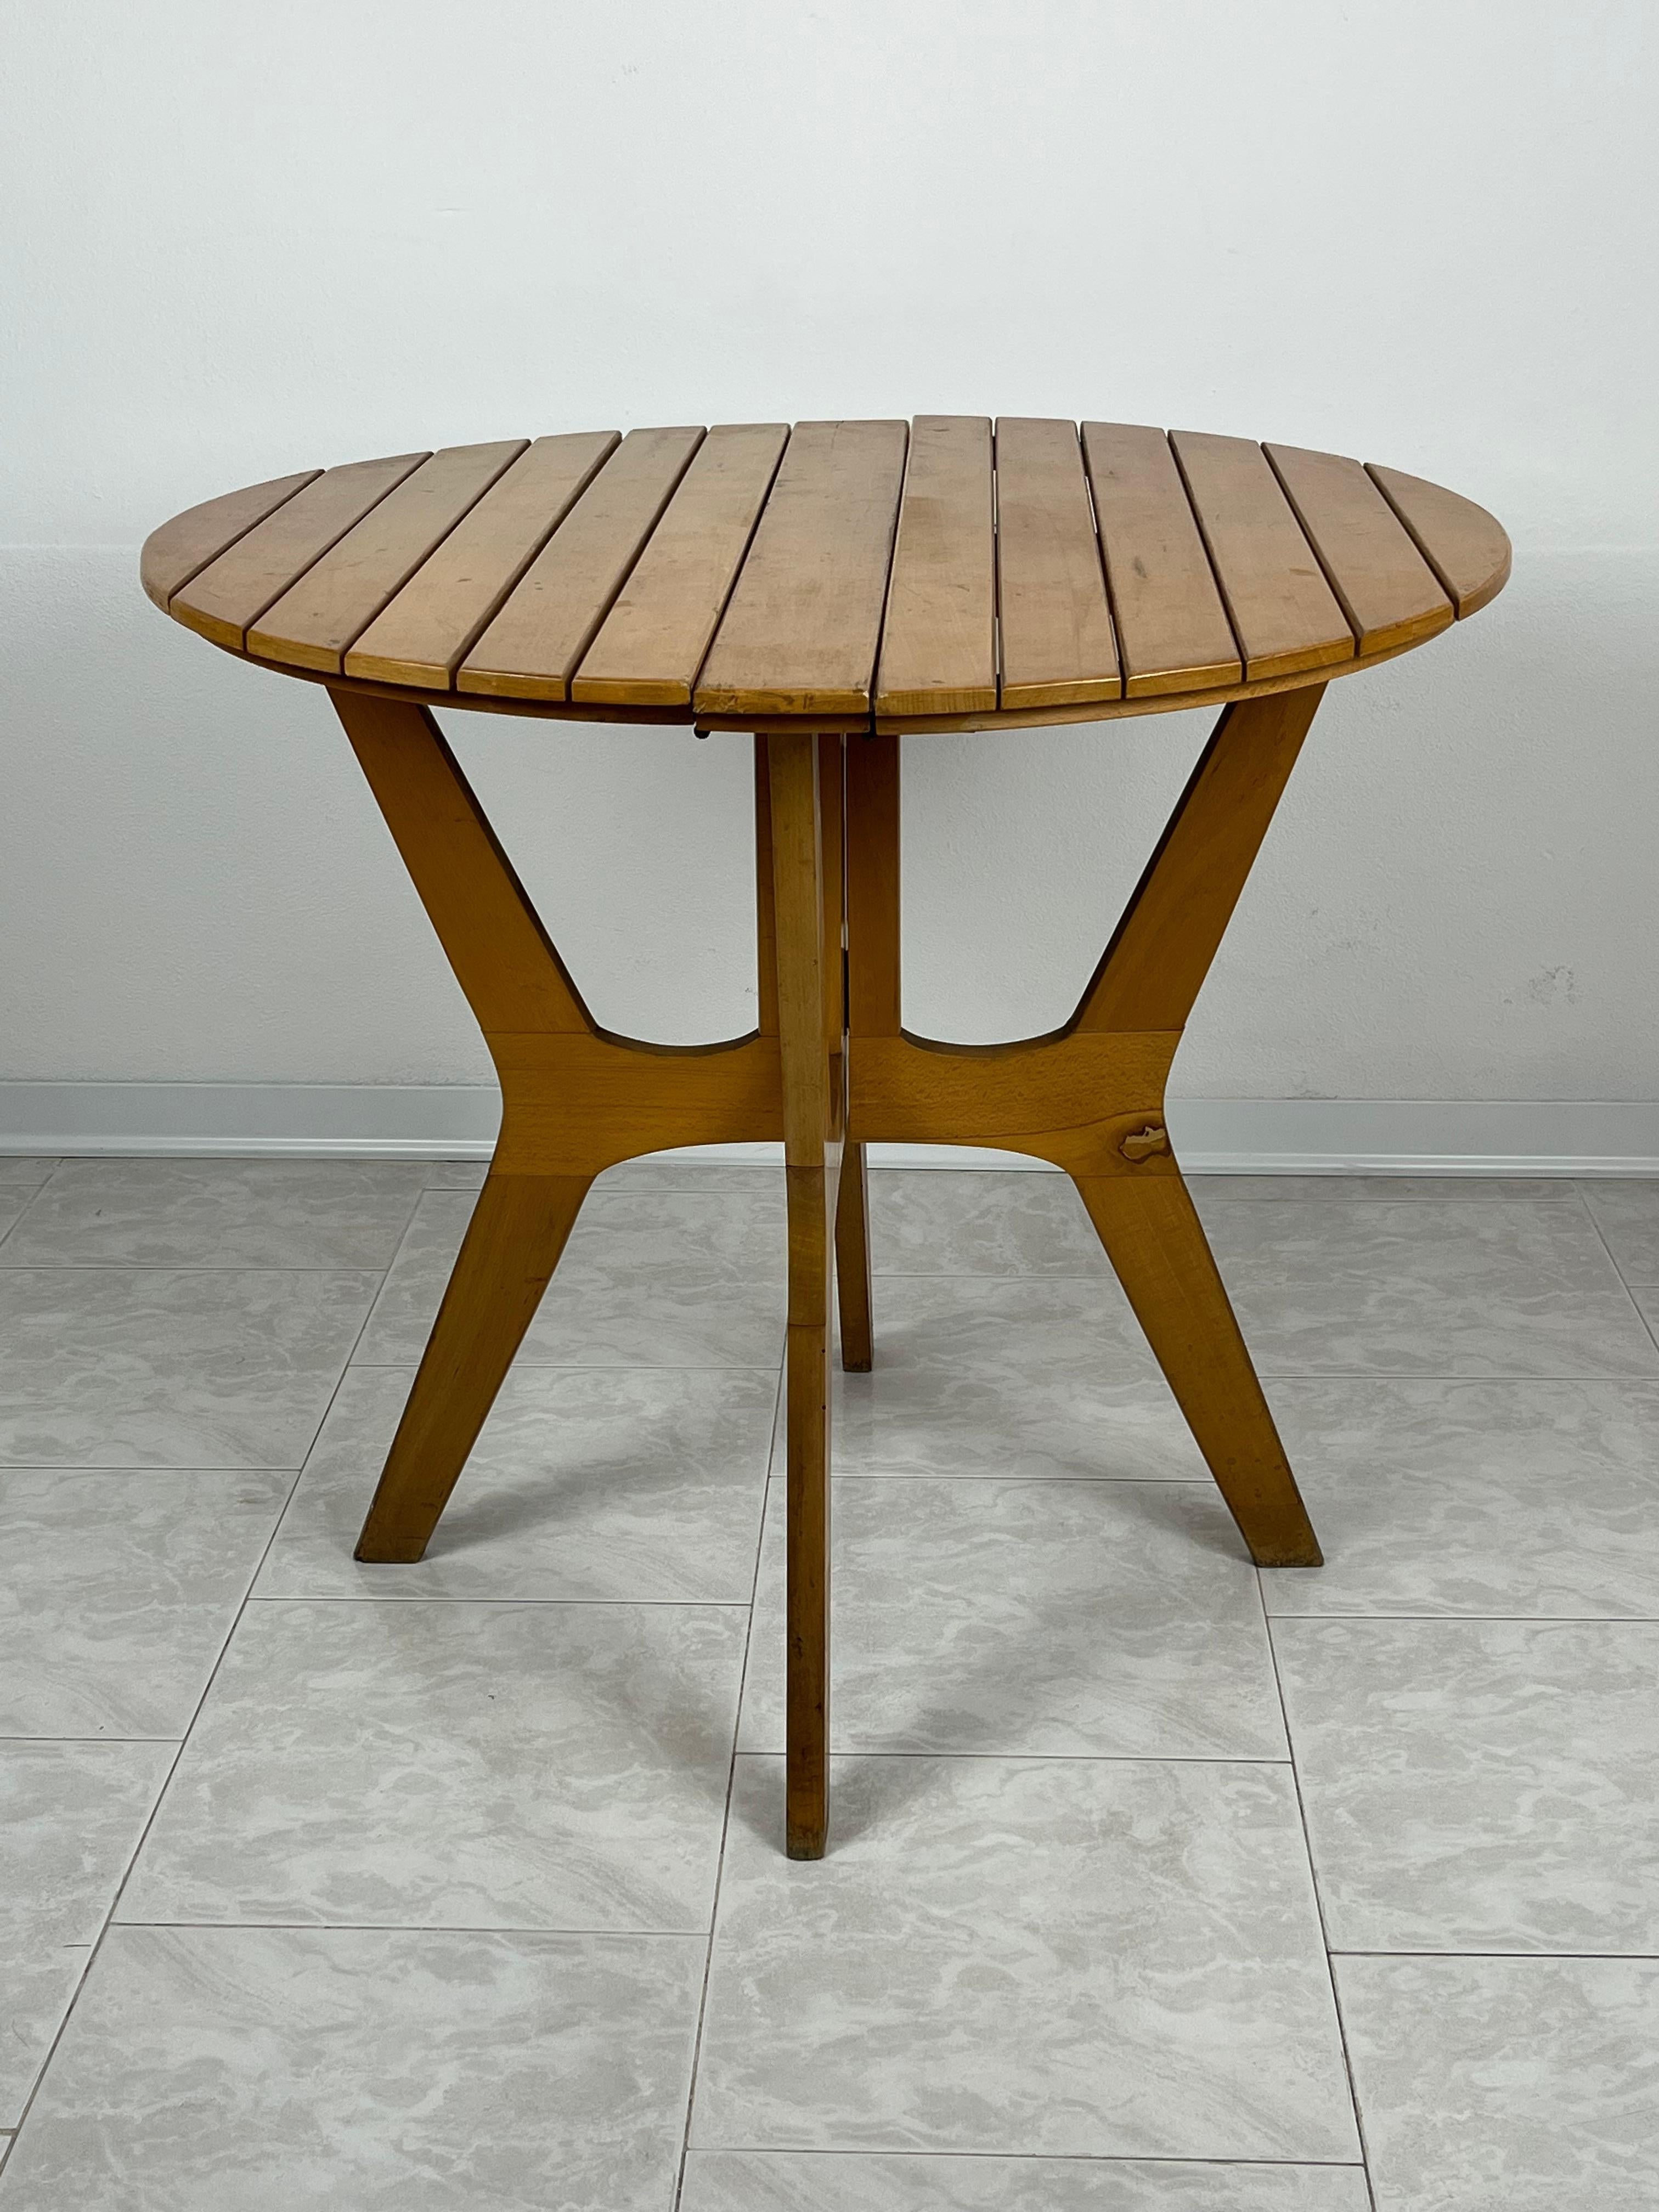 Folding Table in Maple Wood, Fada Asiago, Italy, 1976 In Good Condition For Sale In Palermo, IT